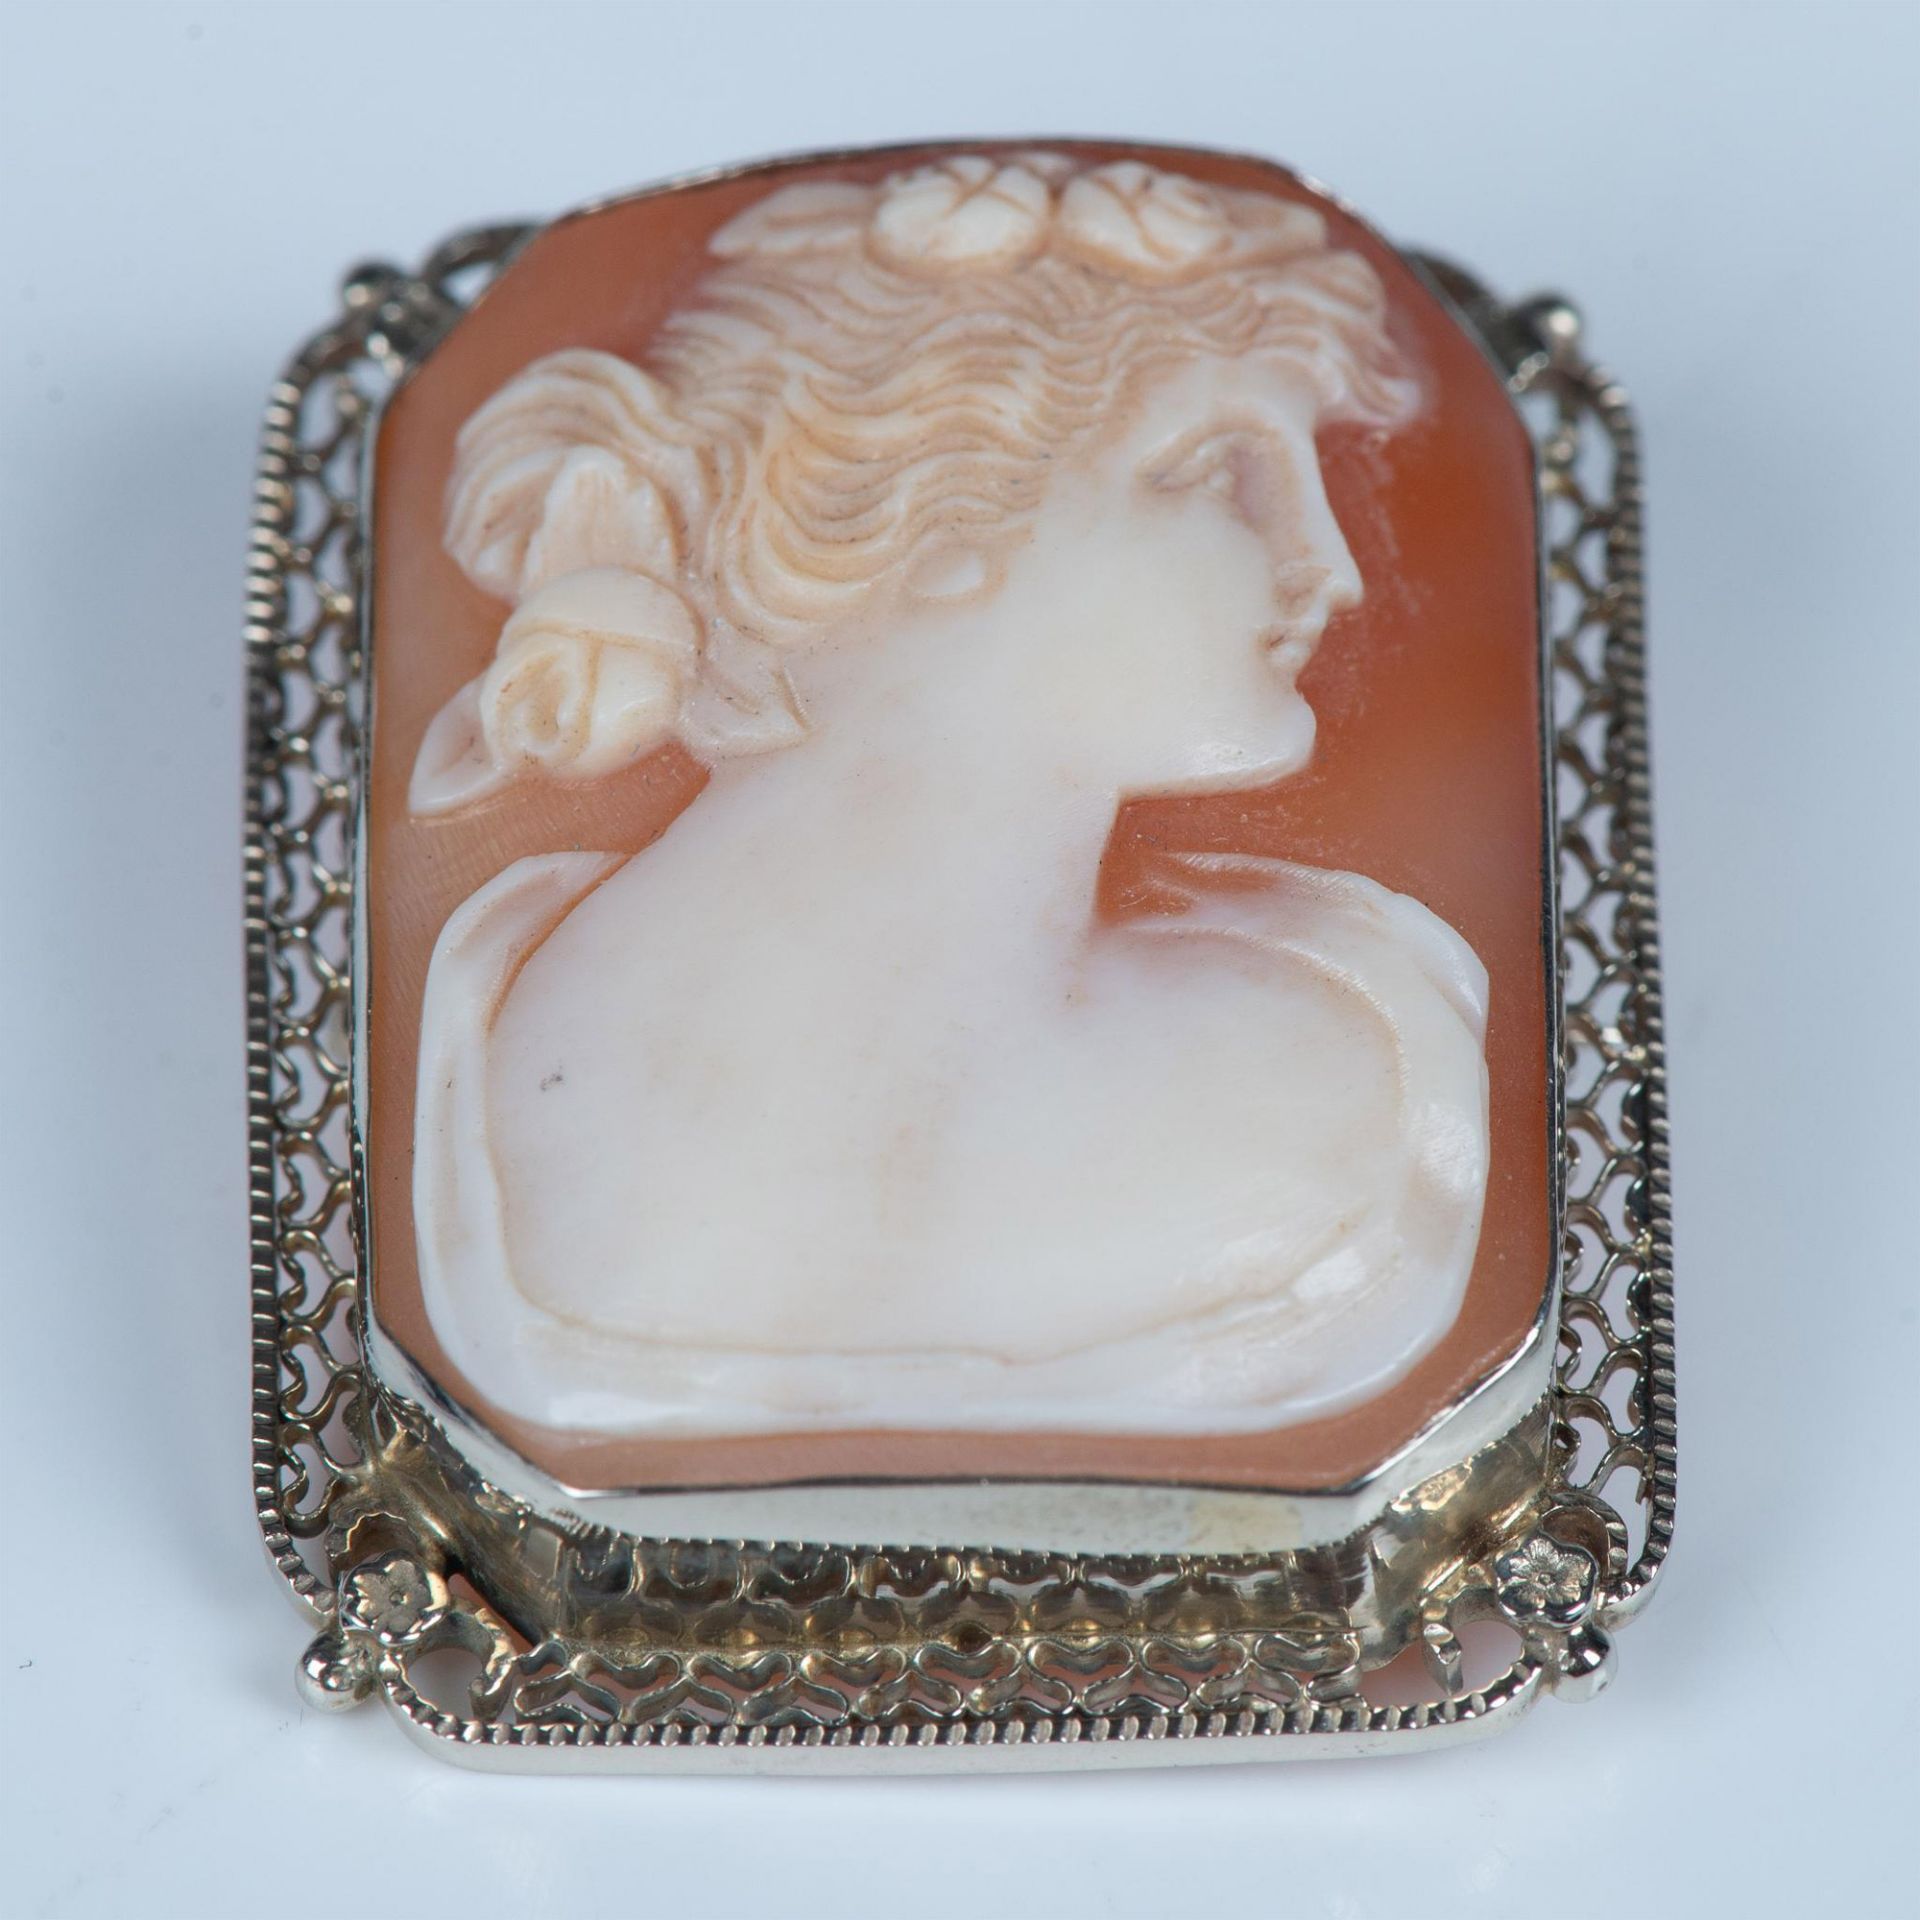 2pc Vintage 14K White Gold Cameo Brooch & Gold Stick Pin - Image 5 of 5